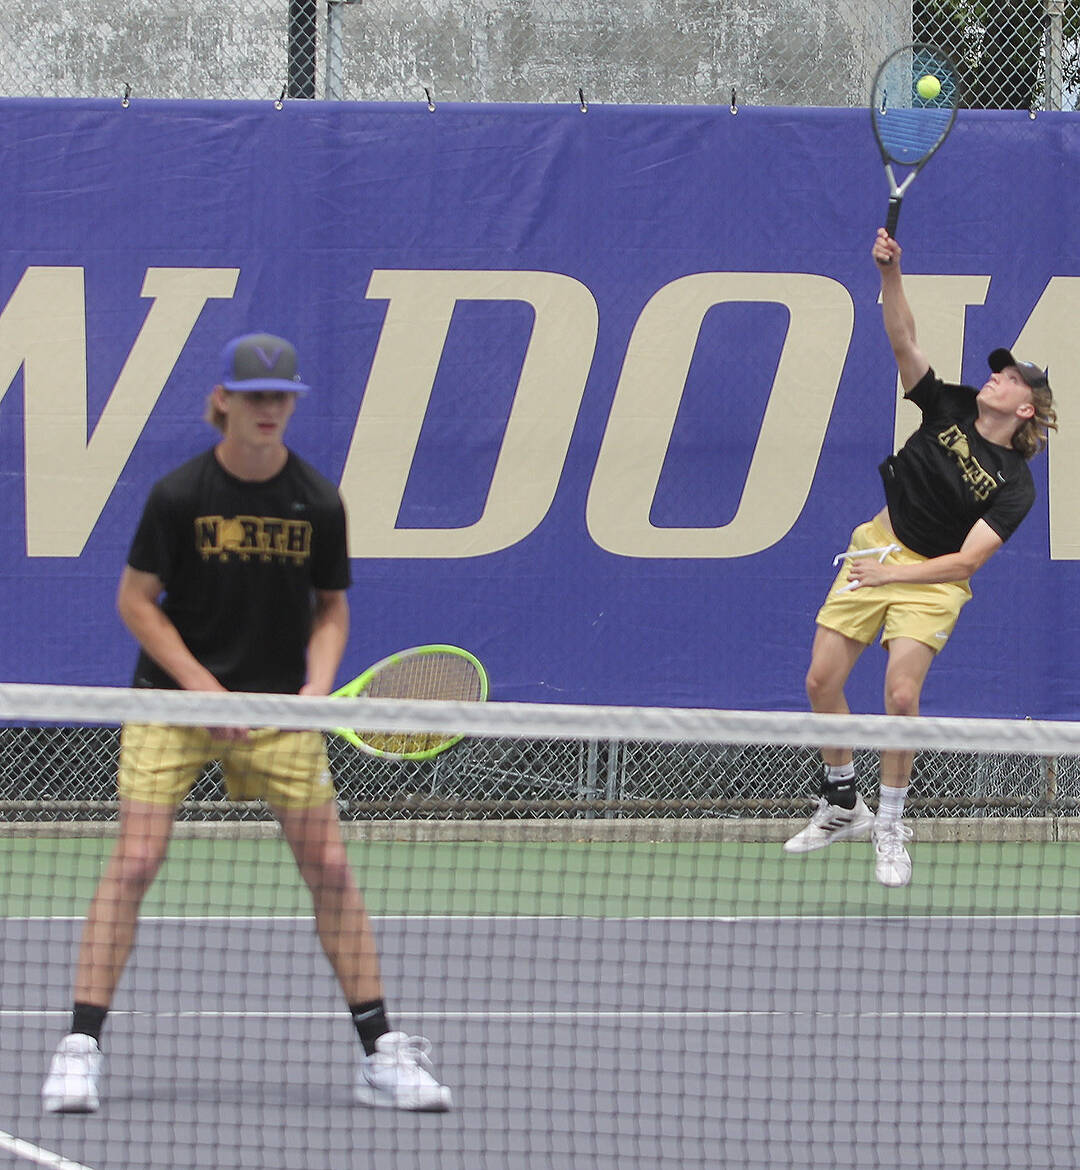 Ethan Gillespie serves while Carl Burchill plays the net in their state match.